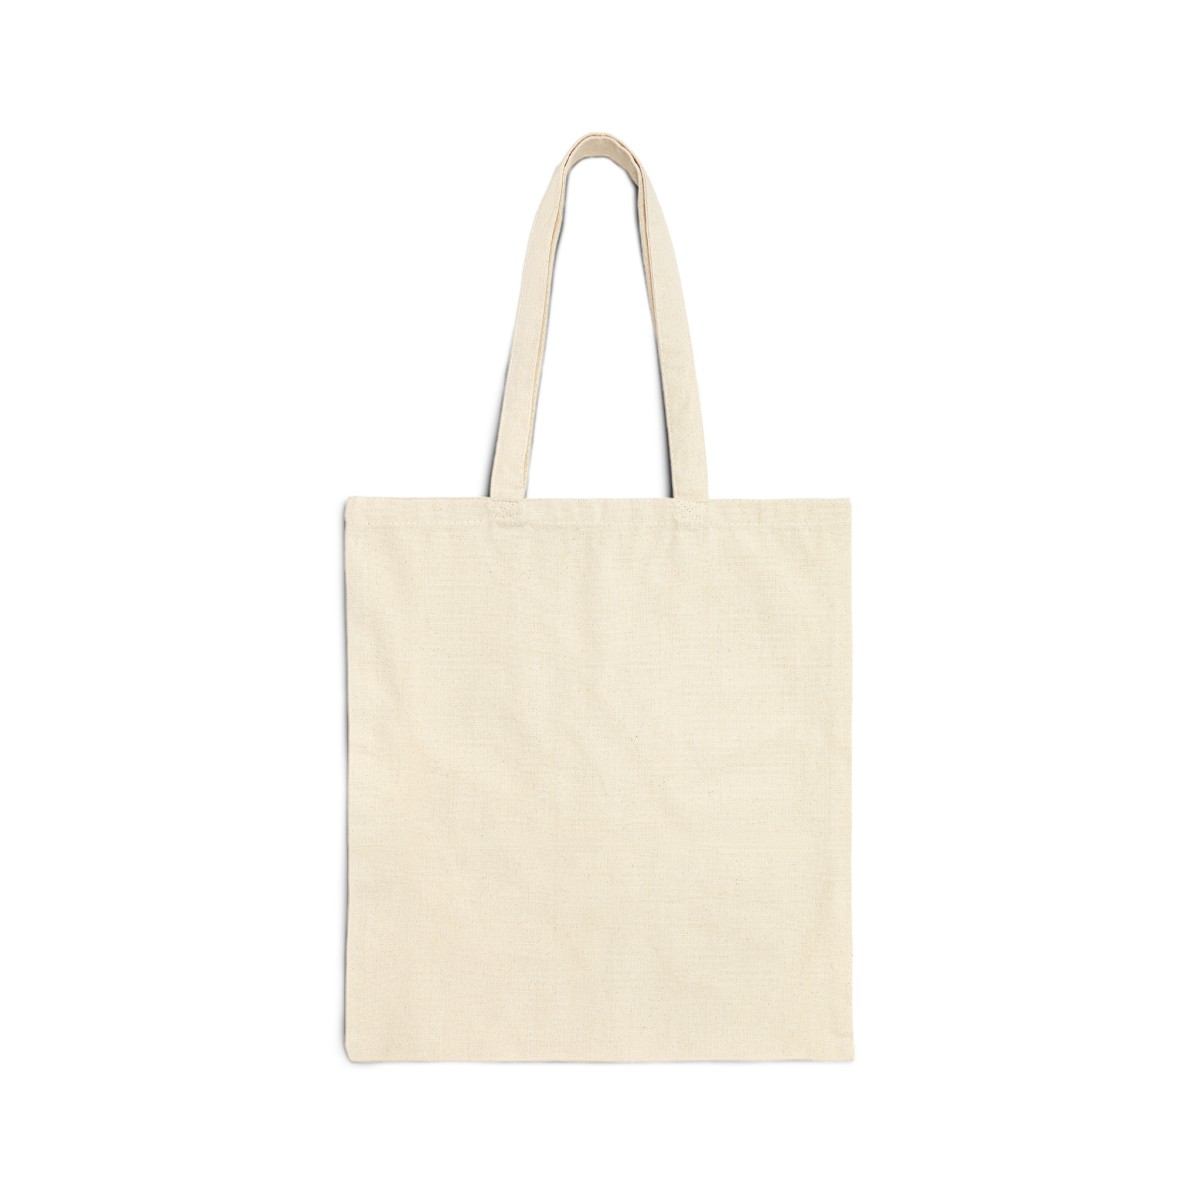 "Whatever I set my hands to" Cotton Canvas Tote Bag product thumbnail image